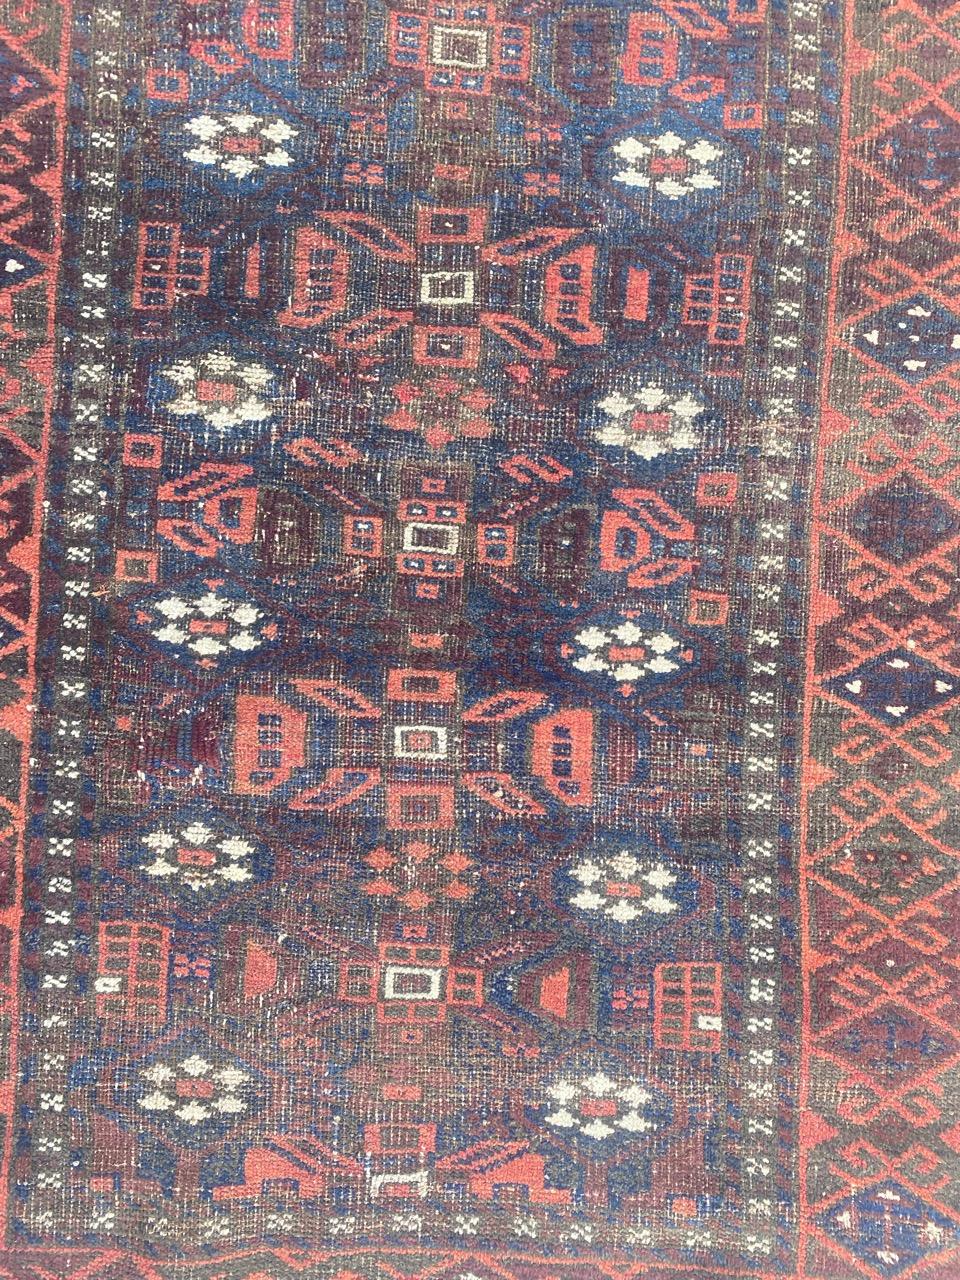 Nice late 19th century Turkmen Afghan Baluch rug with beautiful tribal design and nice natural colors, entirely hand knotted with wool velvet on wool foundation.

✨✨✨
